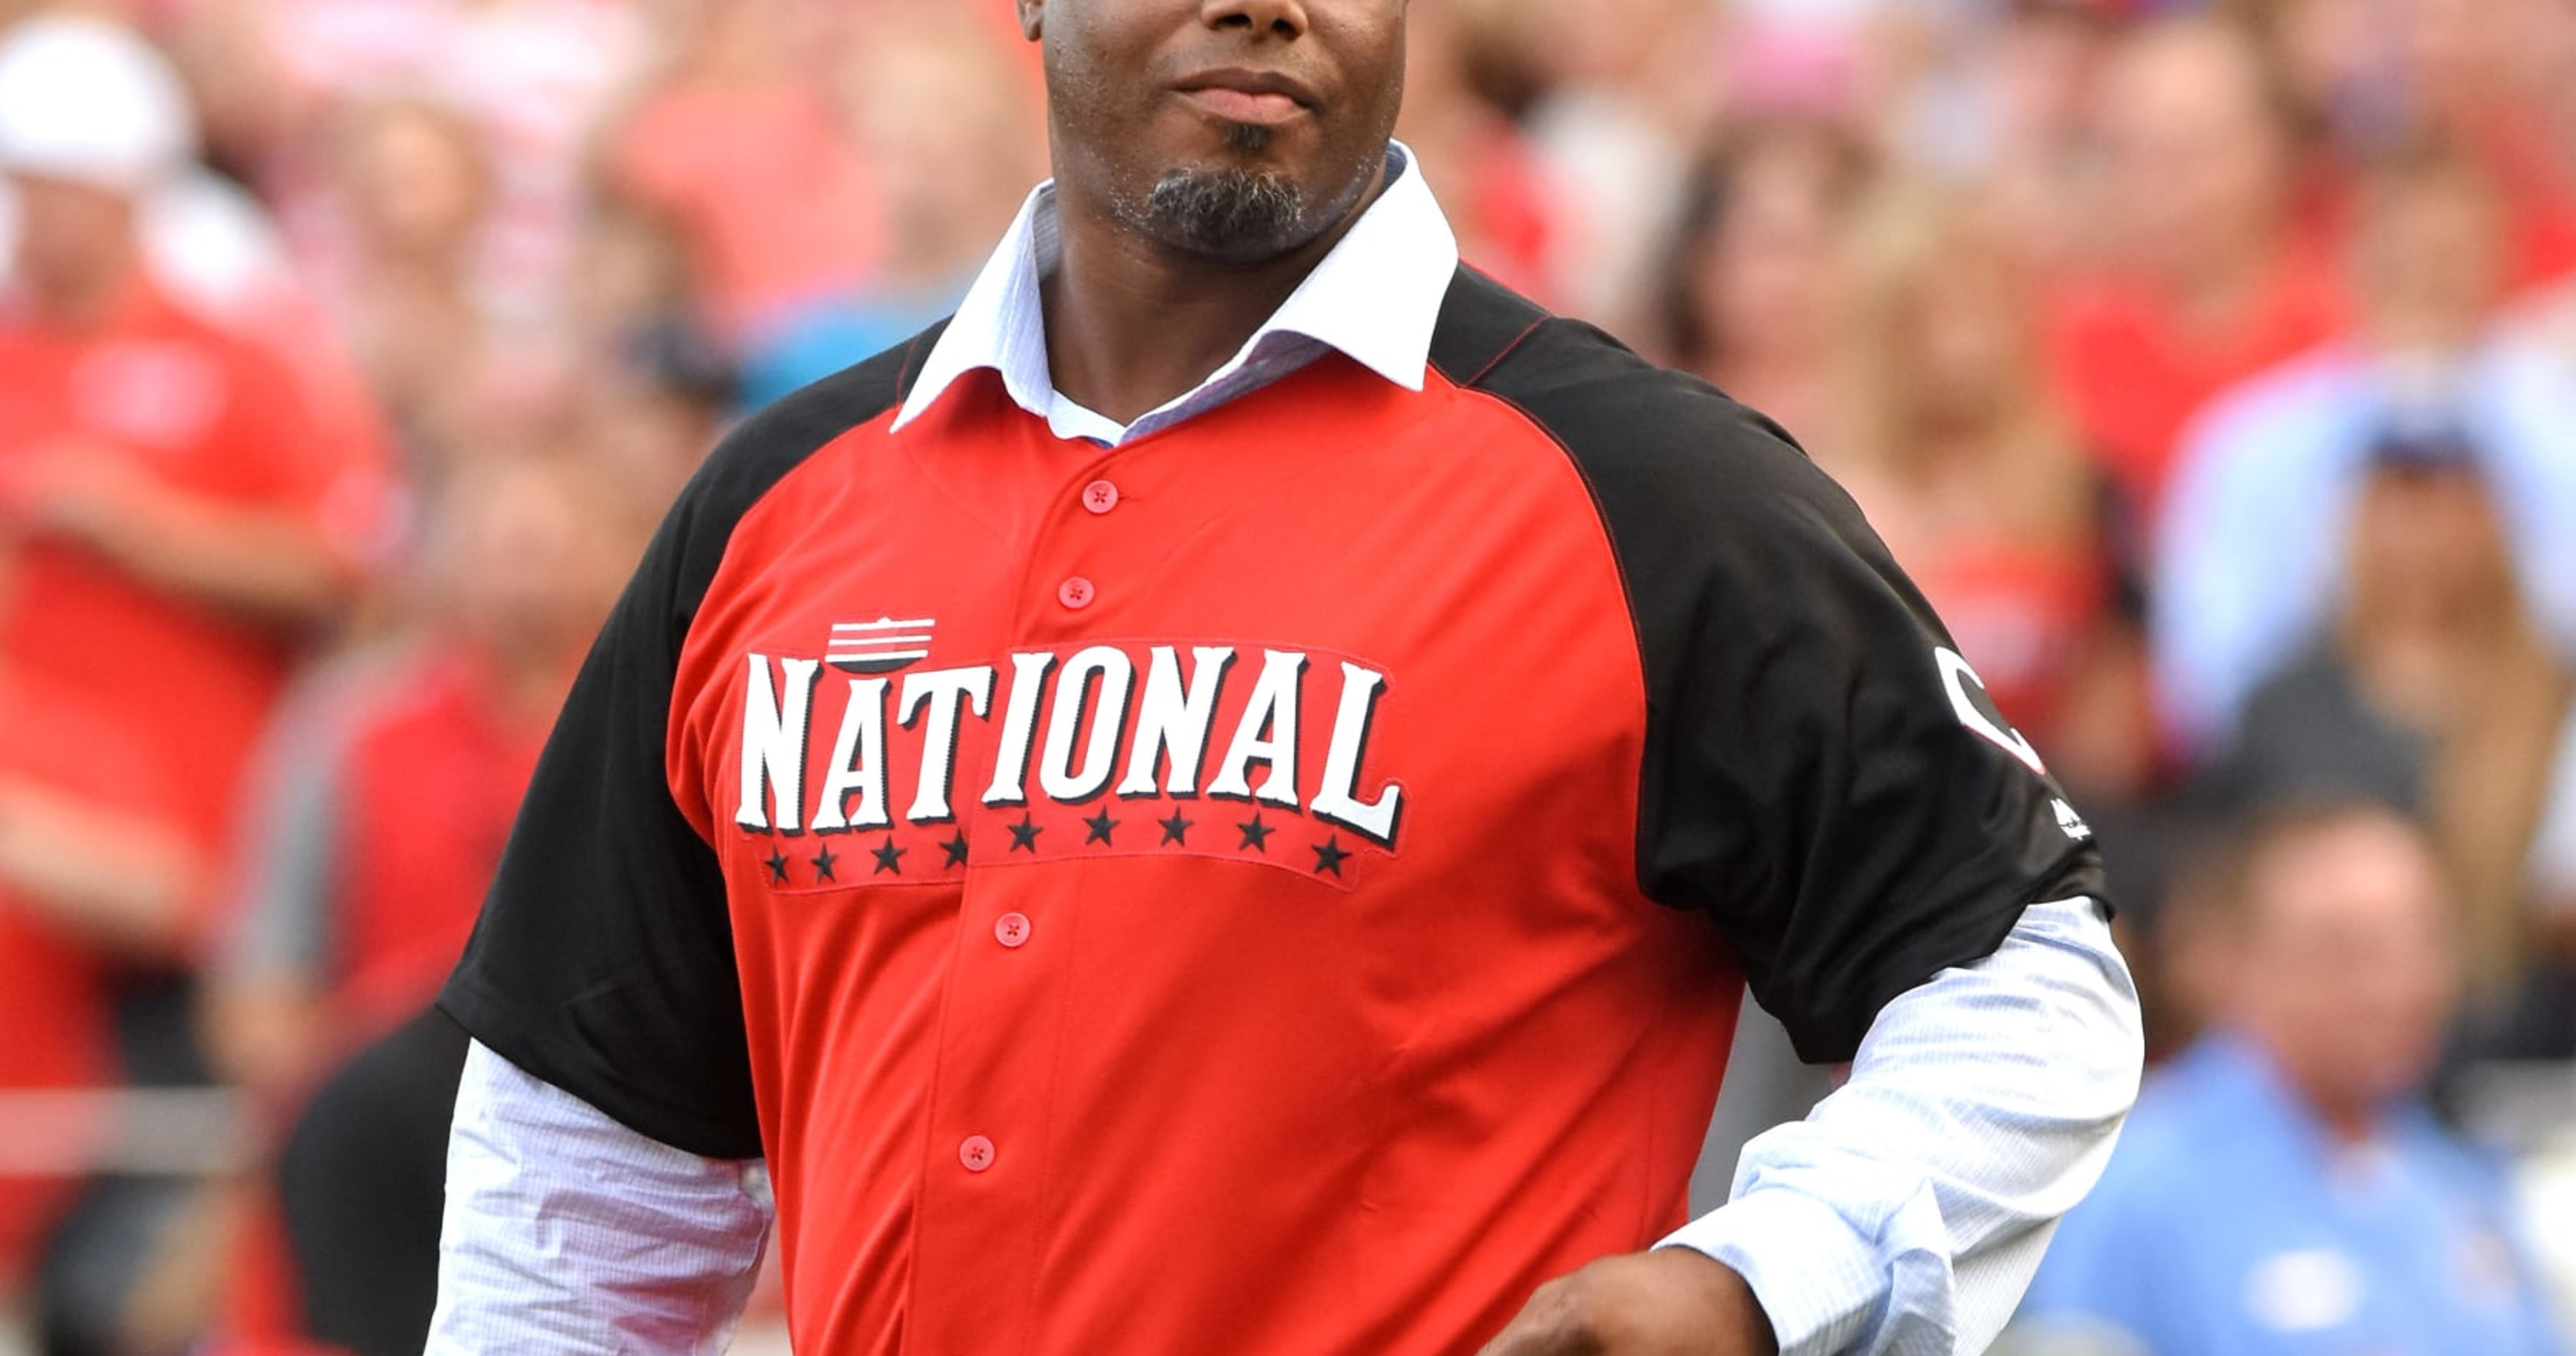 Ken Griffey Jr. during his years with the Cincinnati Reds.